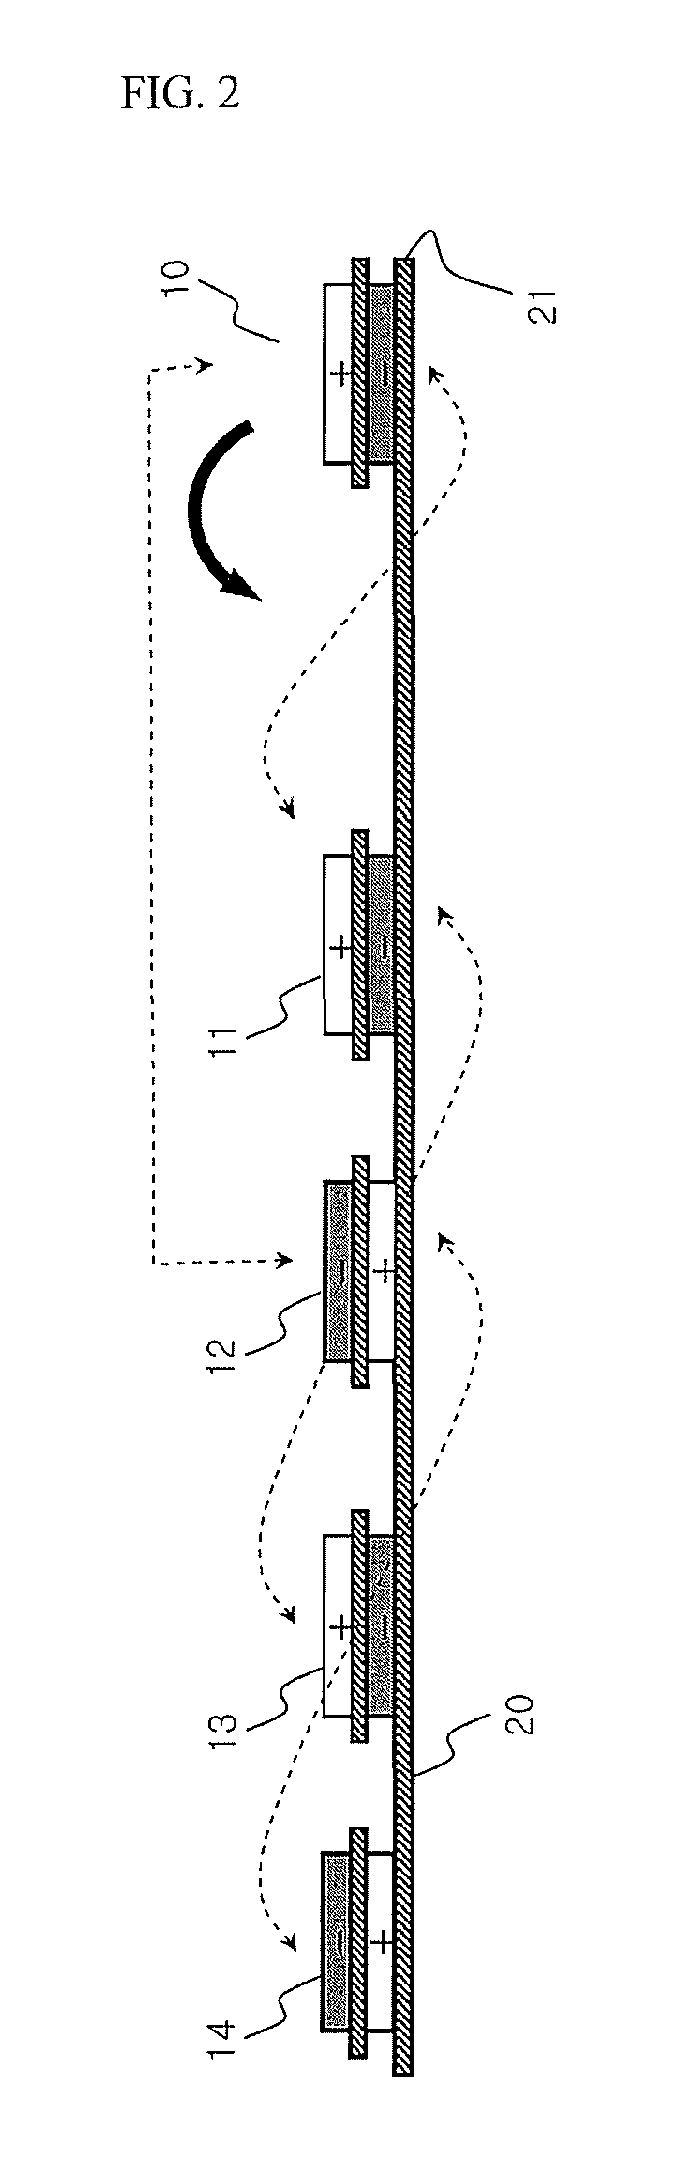 Stack/folding-typed electrode assembly and method for preparation of the same